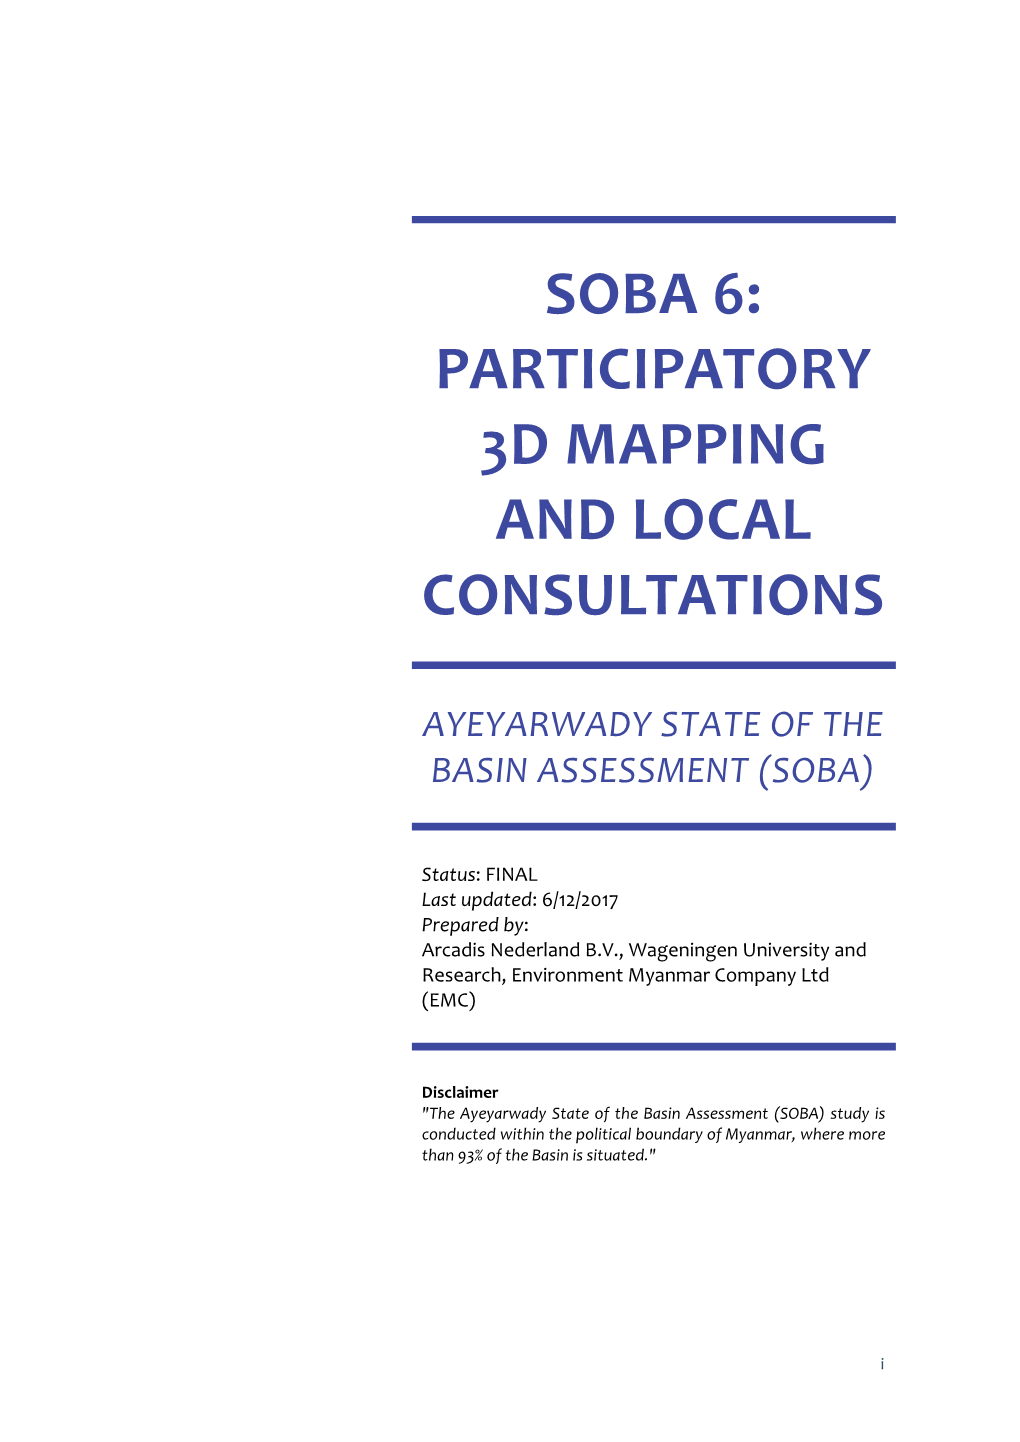 Soba 6: Participatory 3D Mapping and Local Consultations